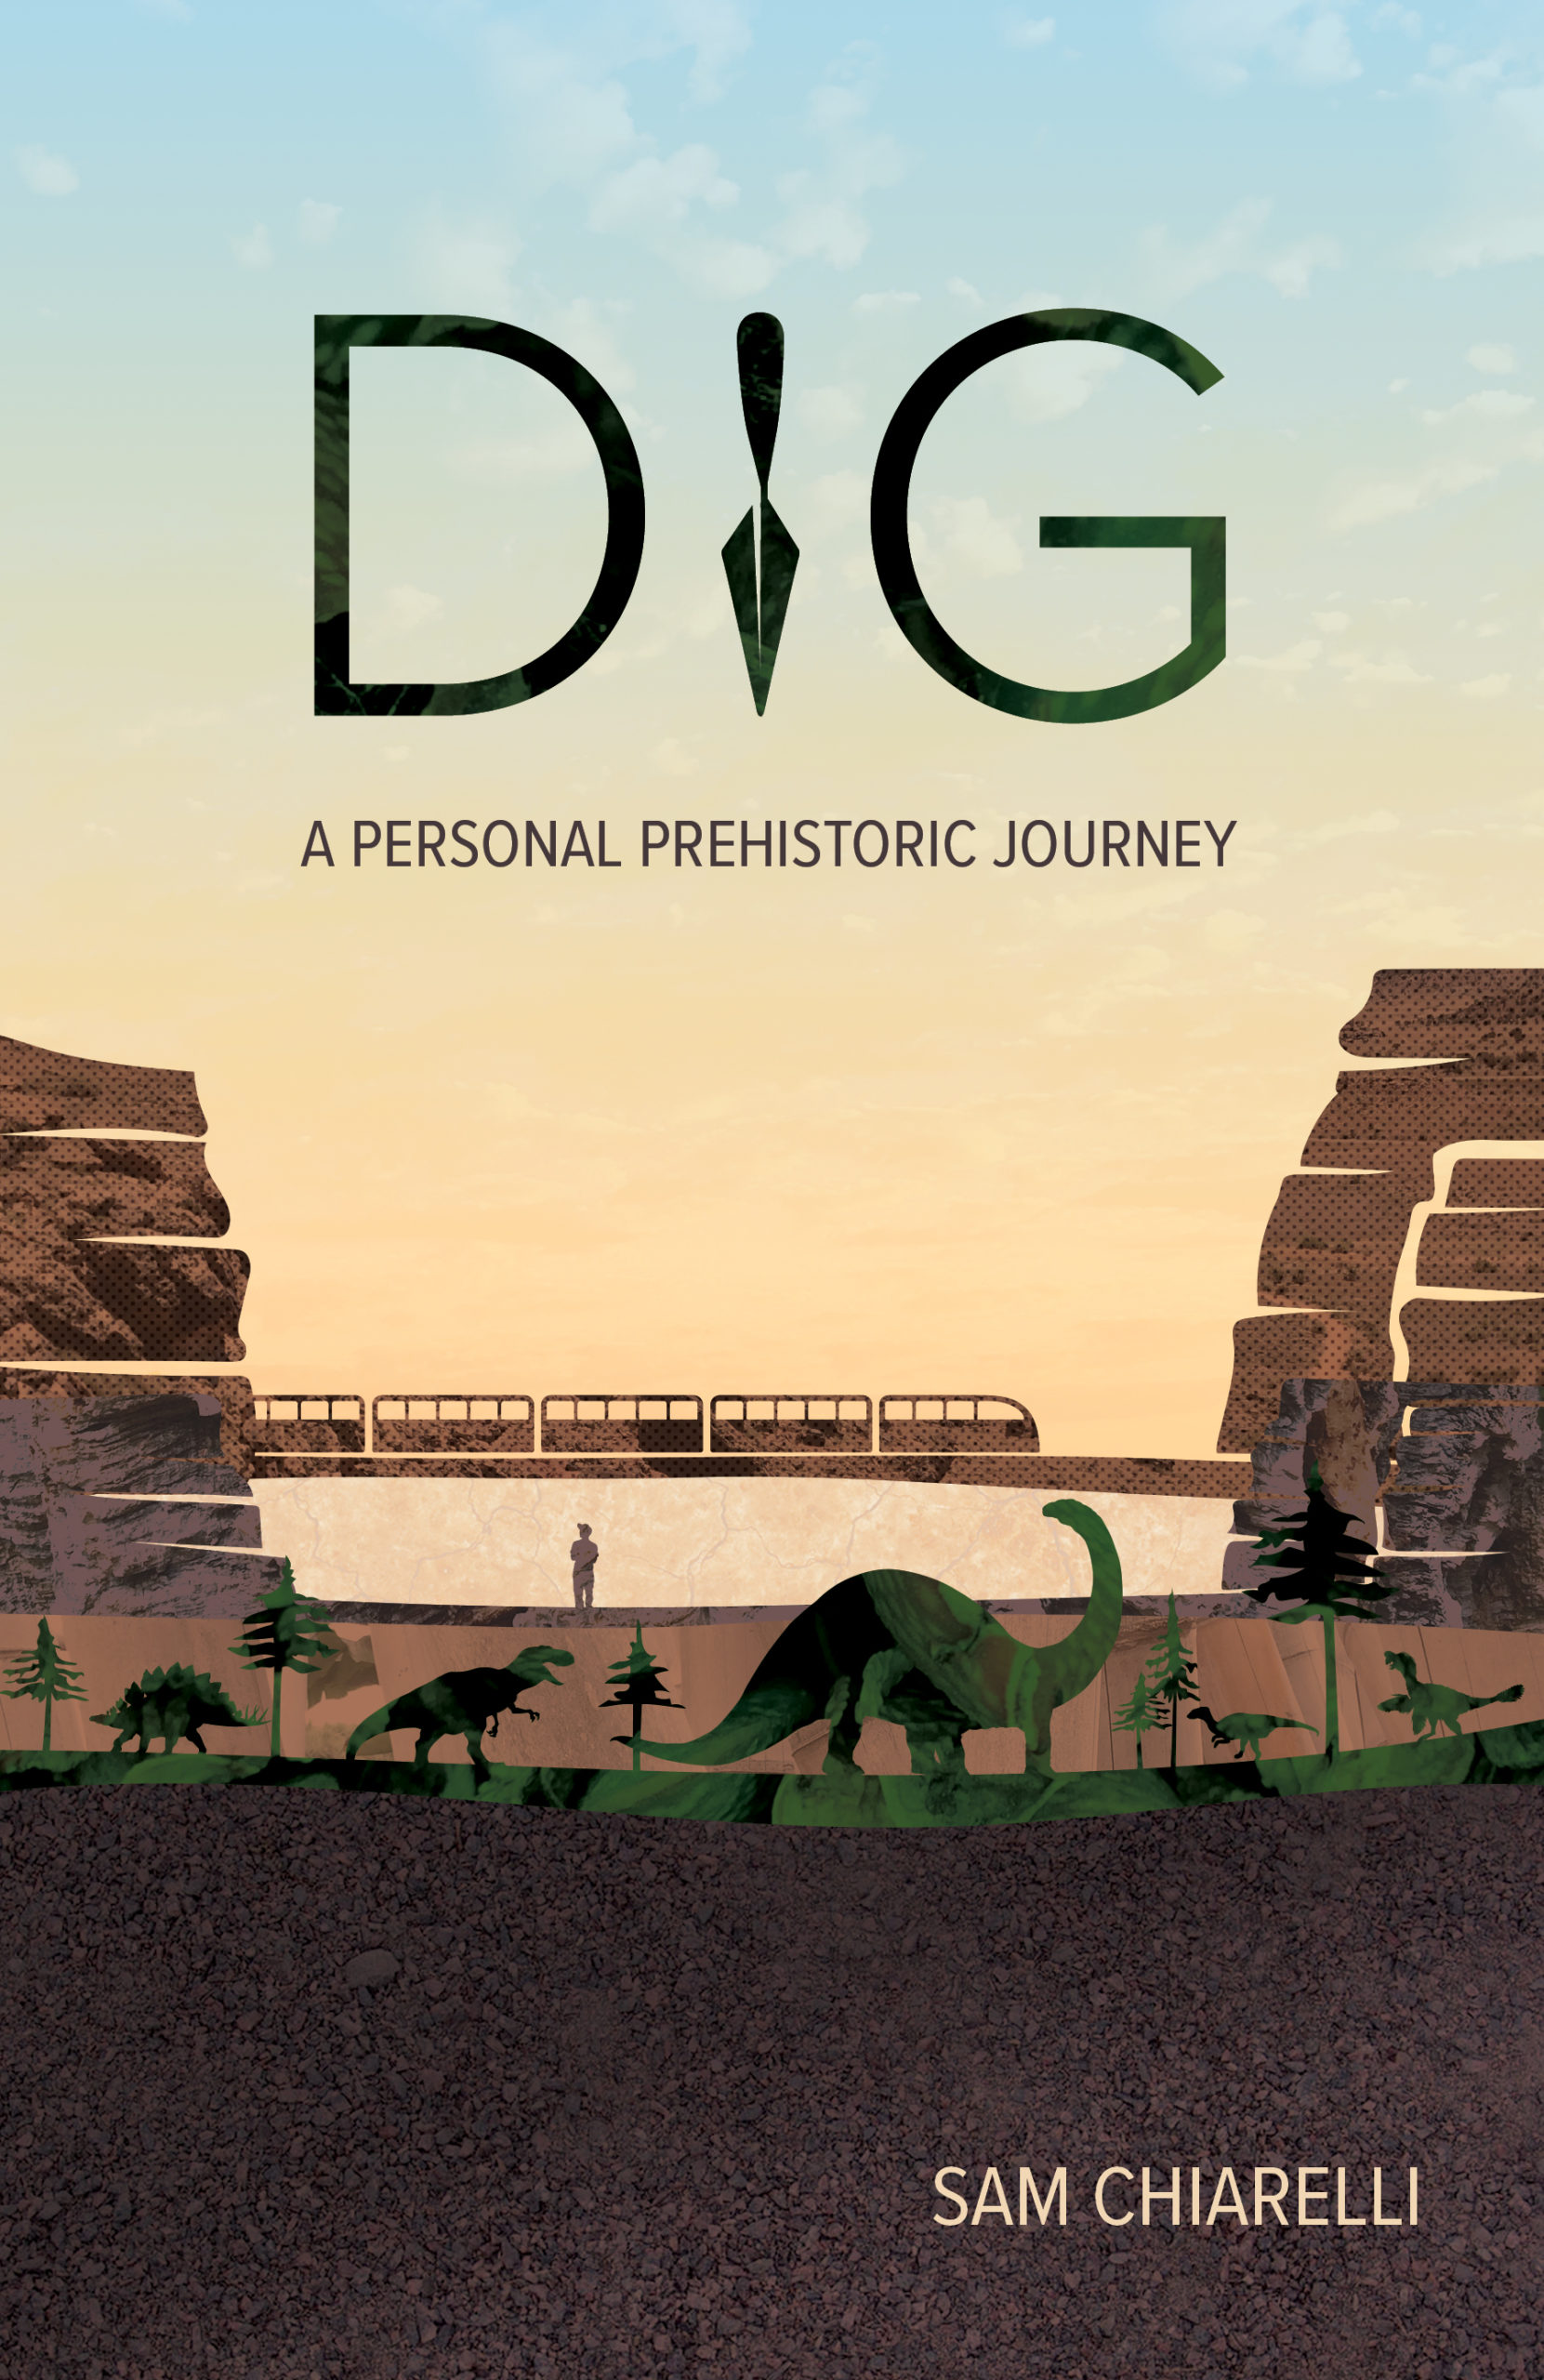 cover of dig - train going across rocky ledges, sunset, various dinos underground and image of author